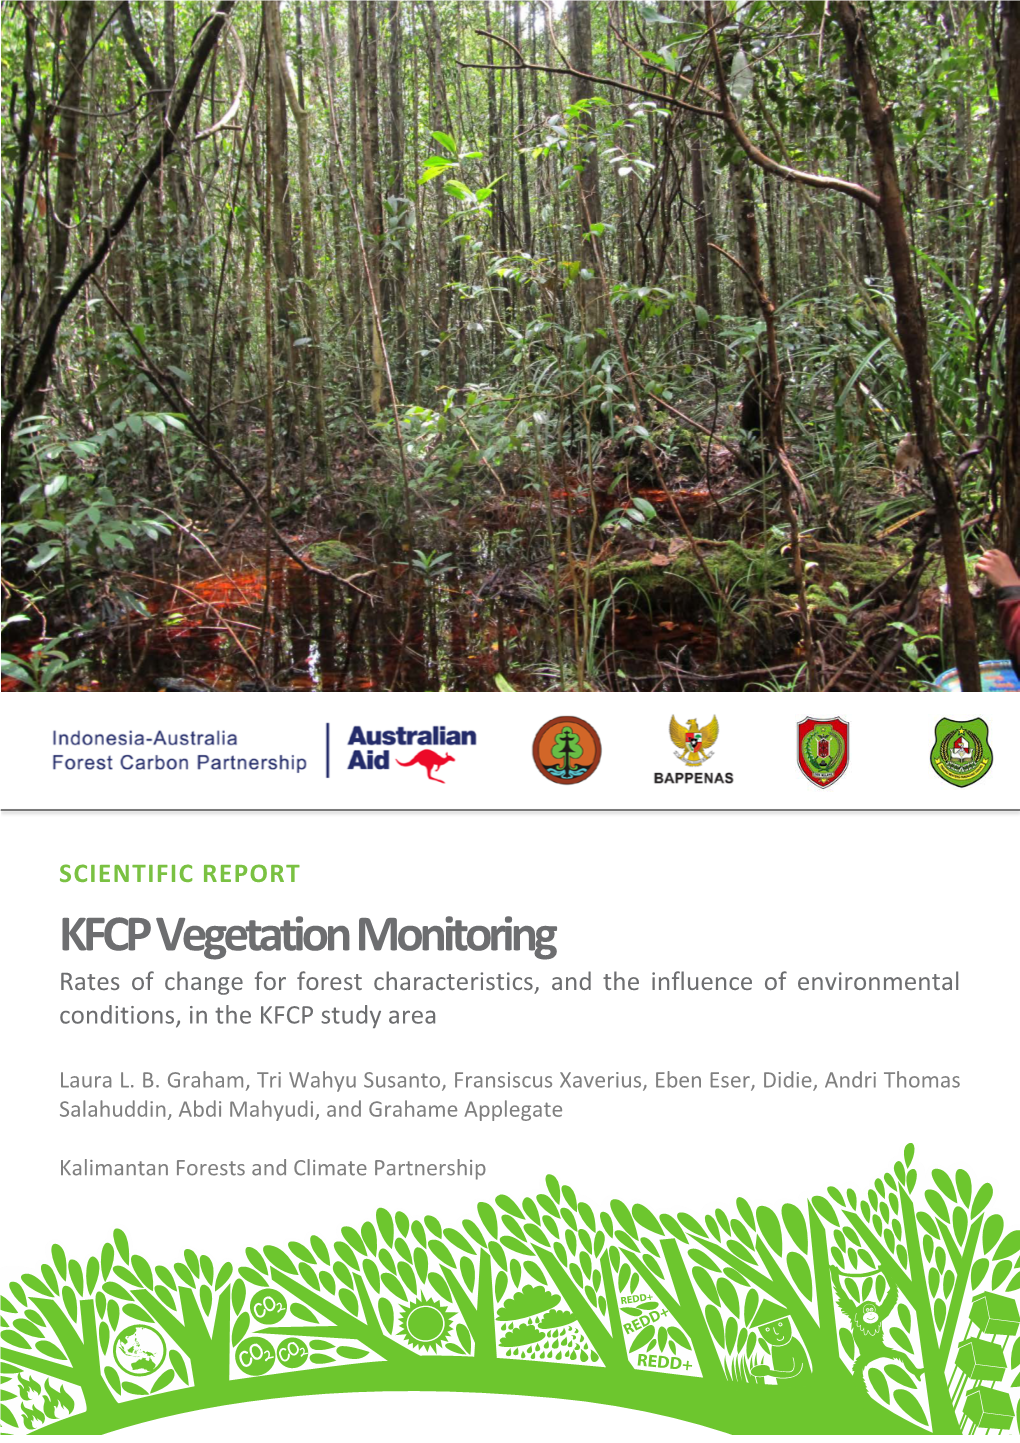 KFCP Vegetation Monitoring Rates of Change for Forest Characteristics, and the Influence of Environmental Conditions, in the KFCP Study Area